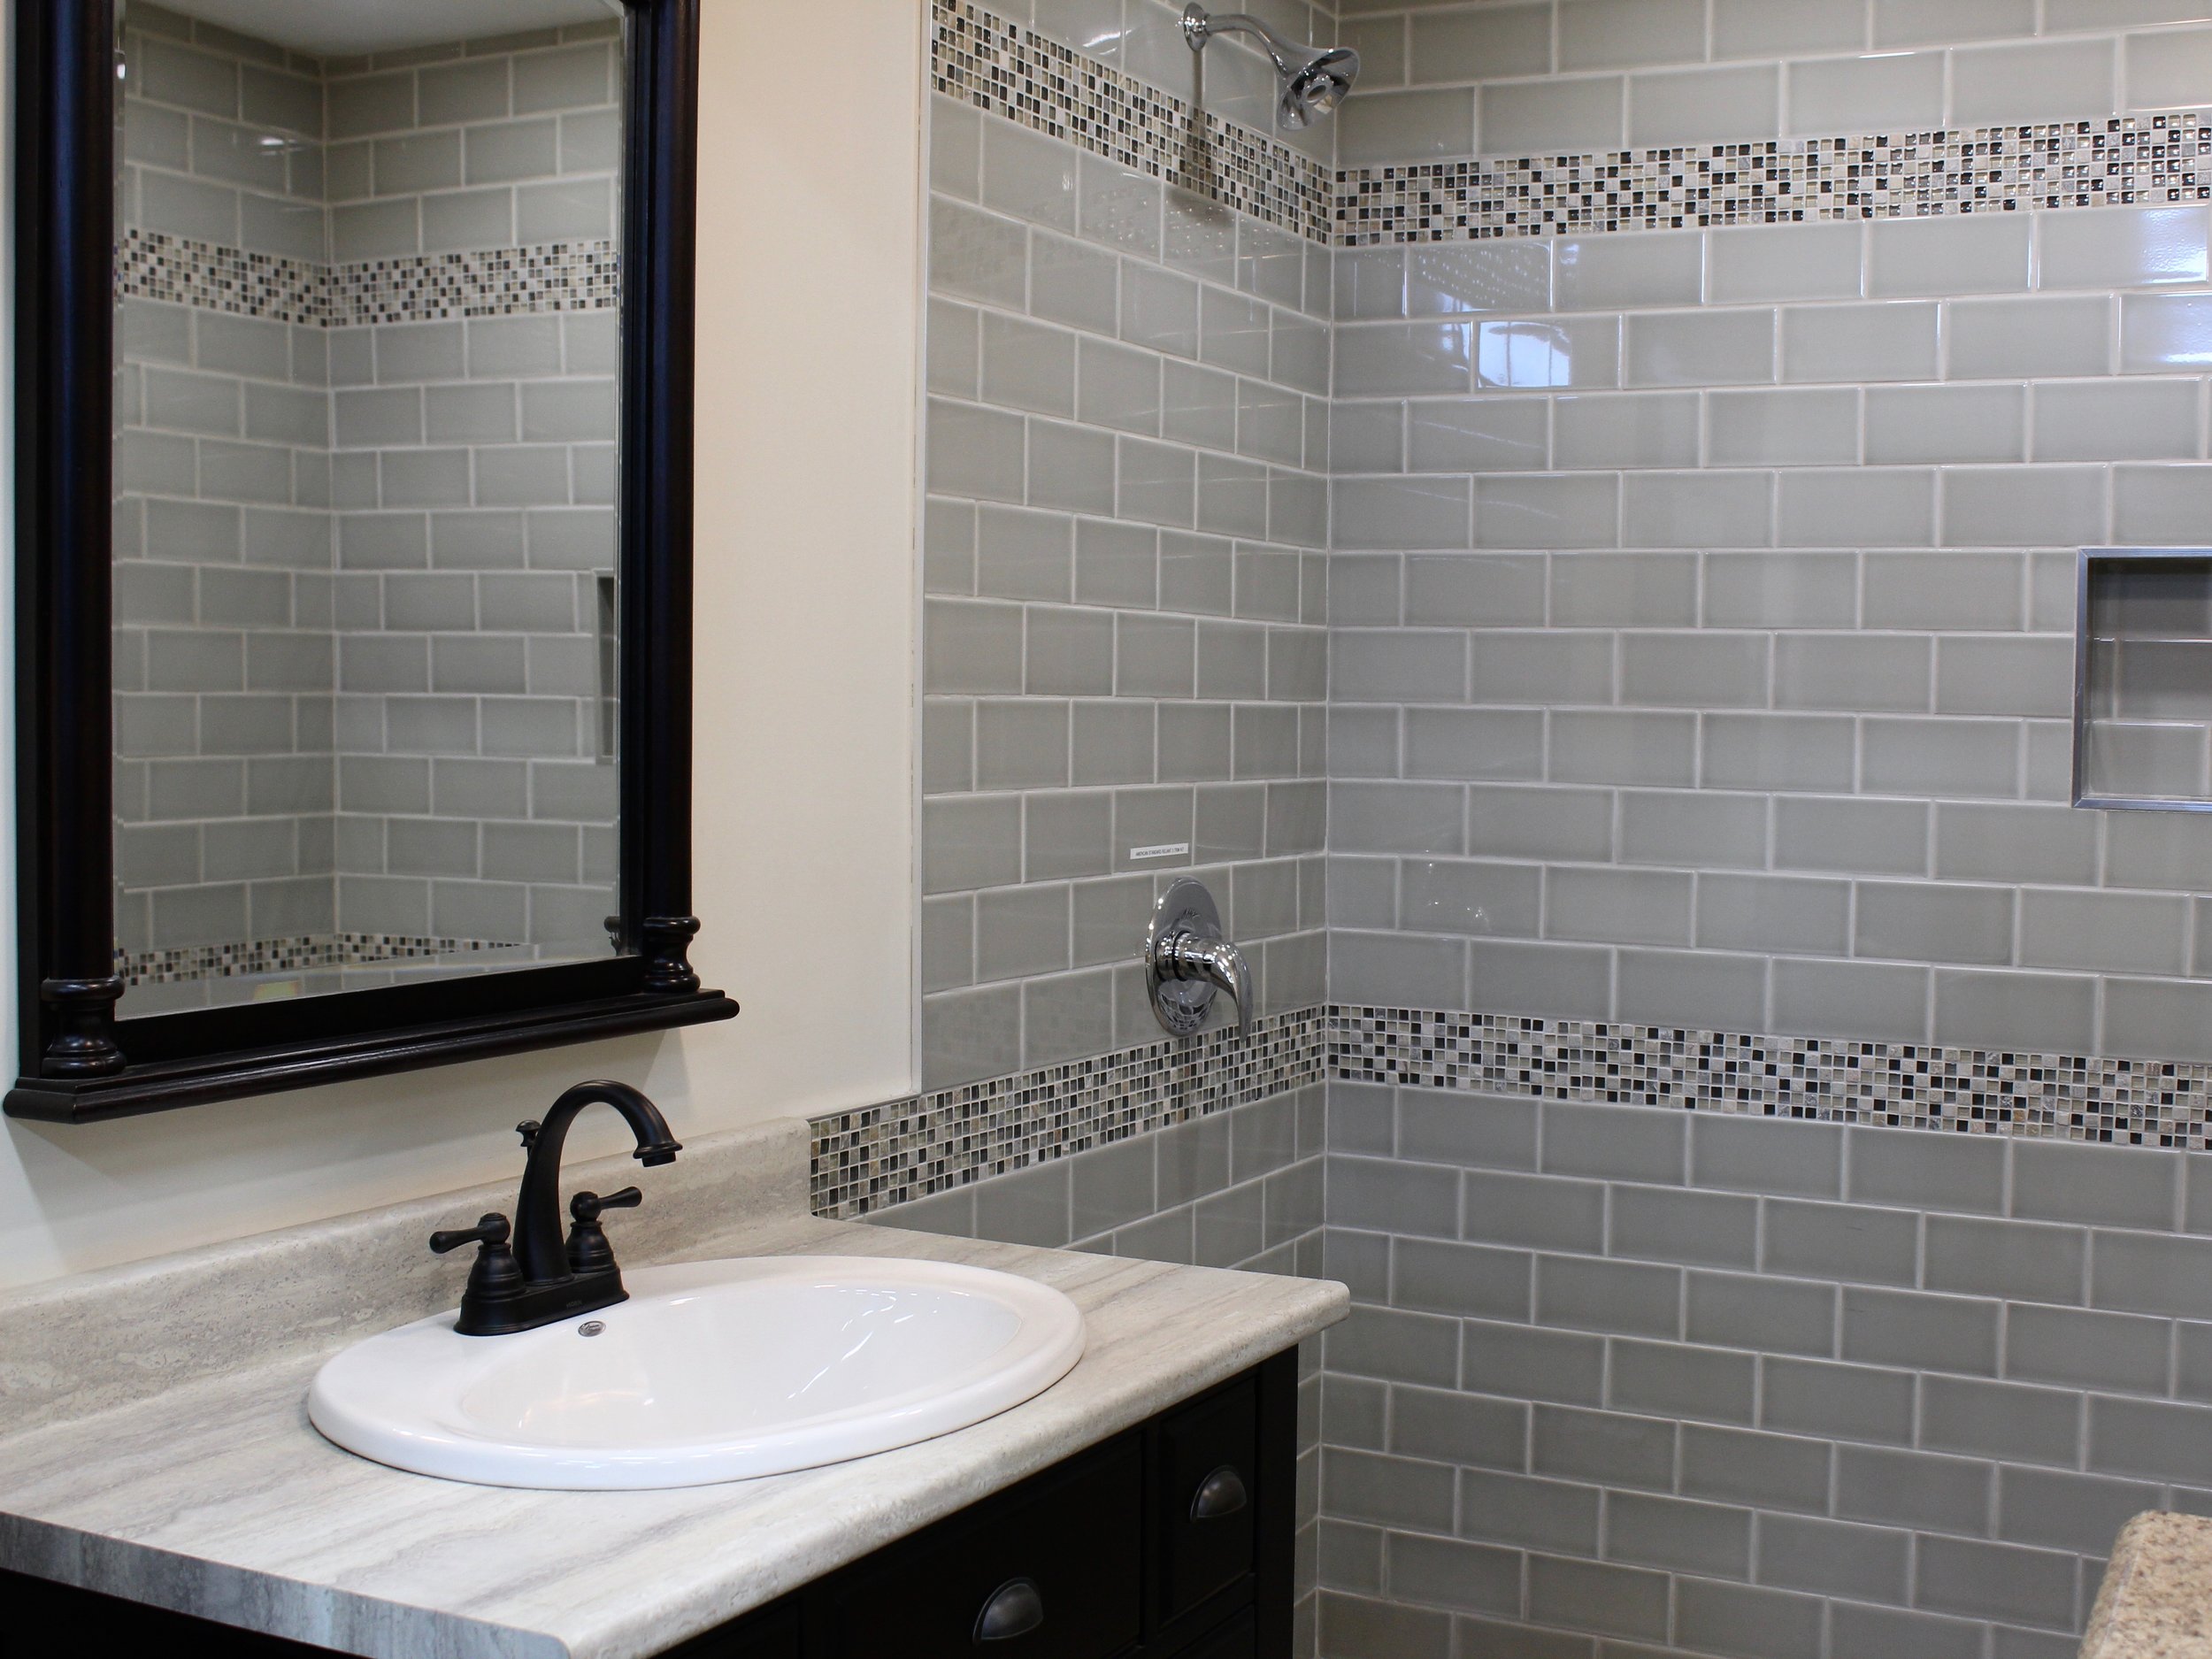 Bathroom with subway tile and mosaics